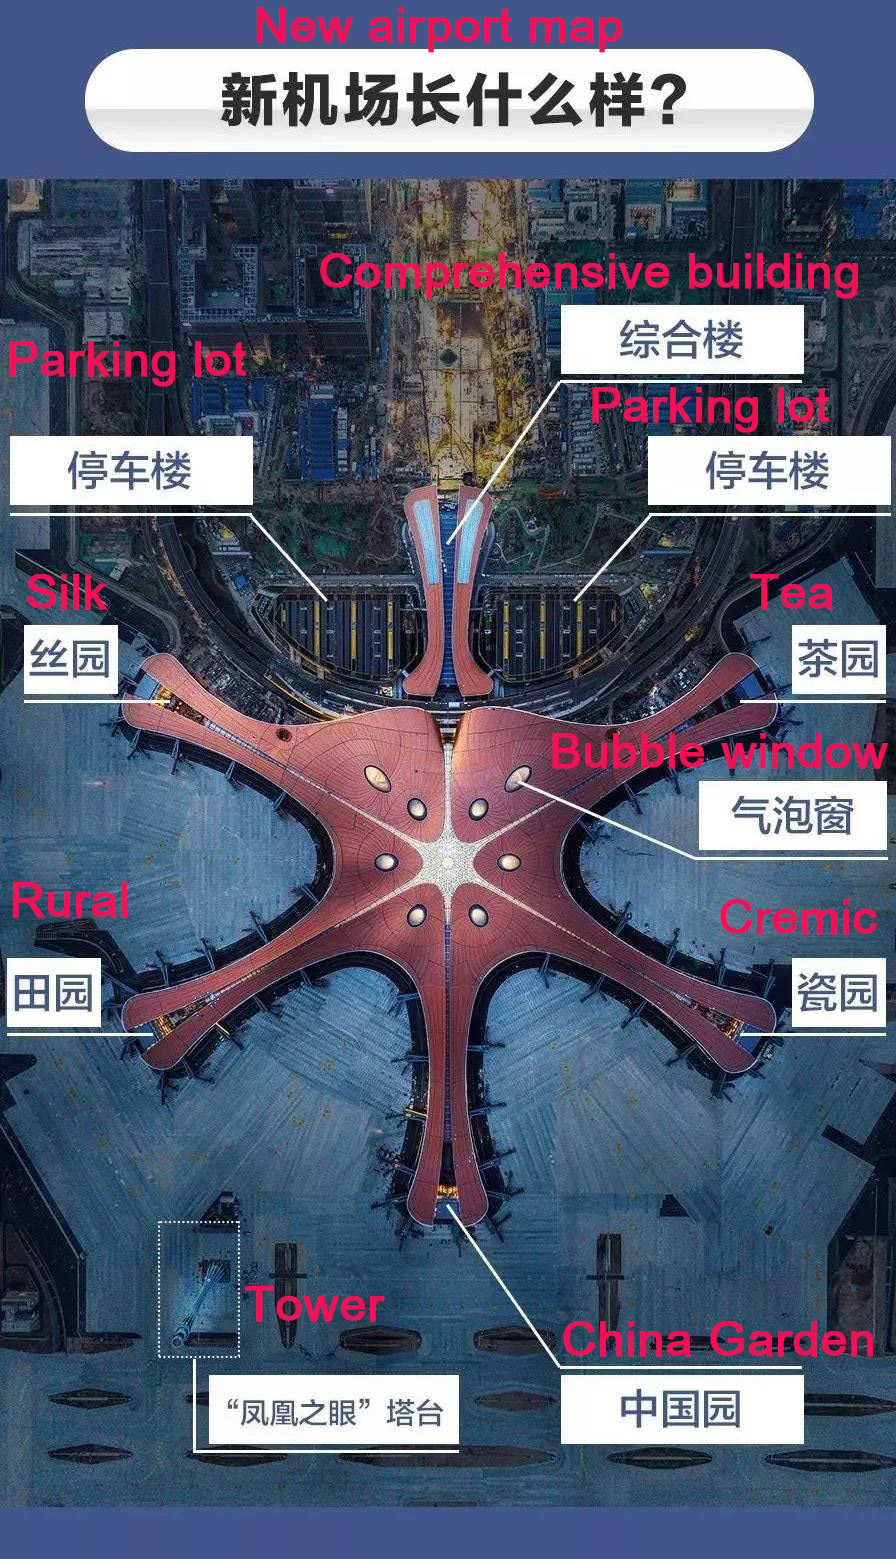 daxing airport